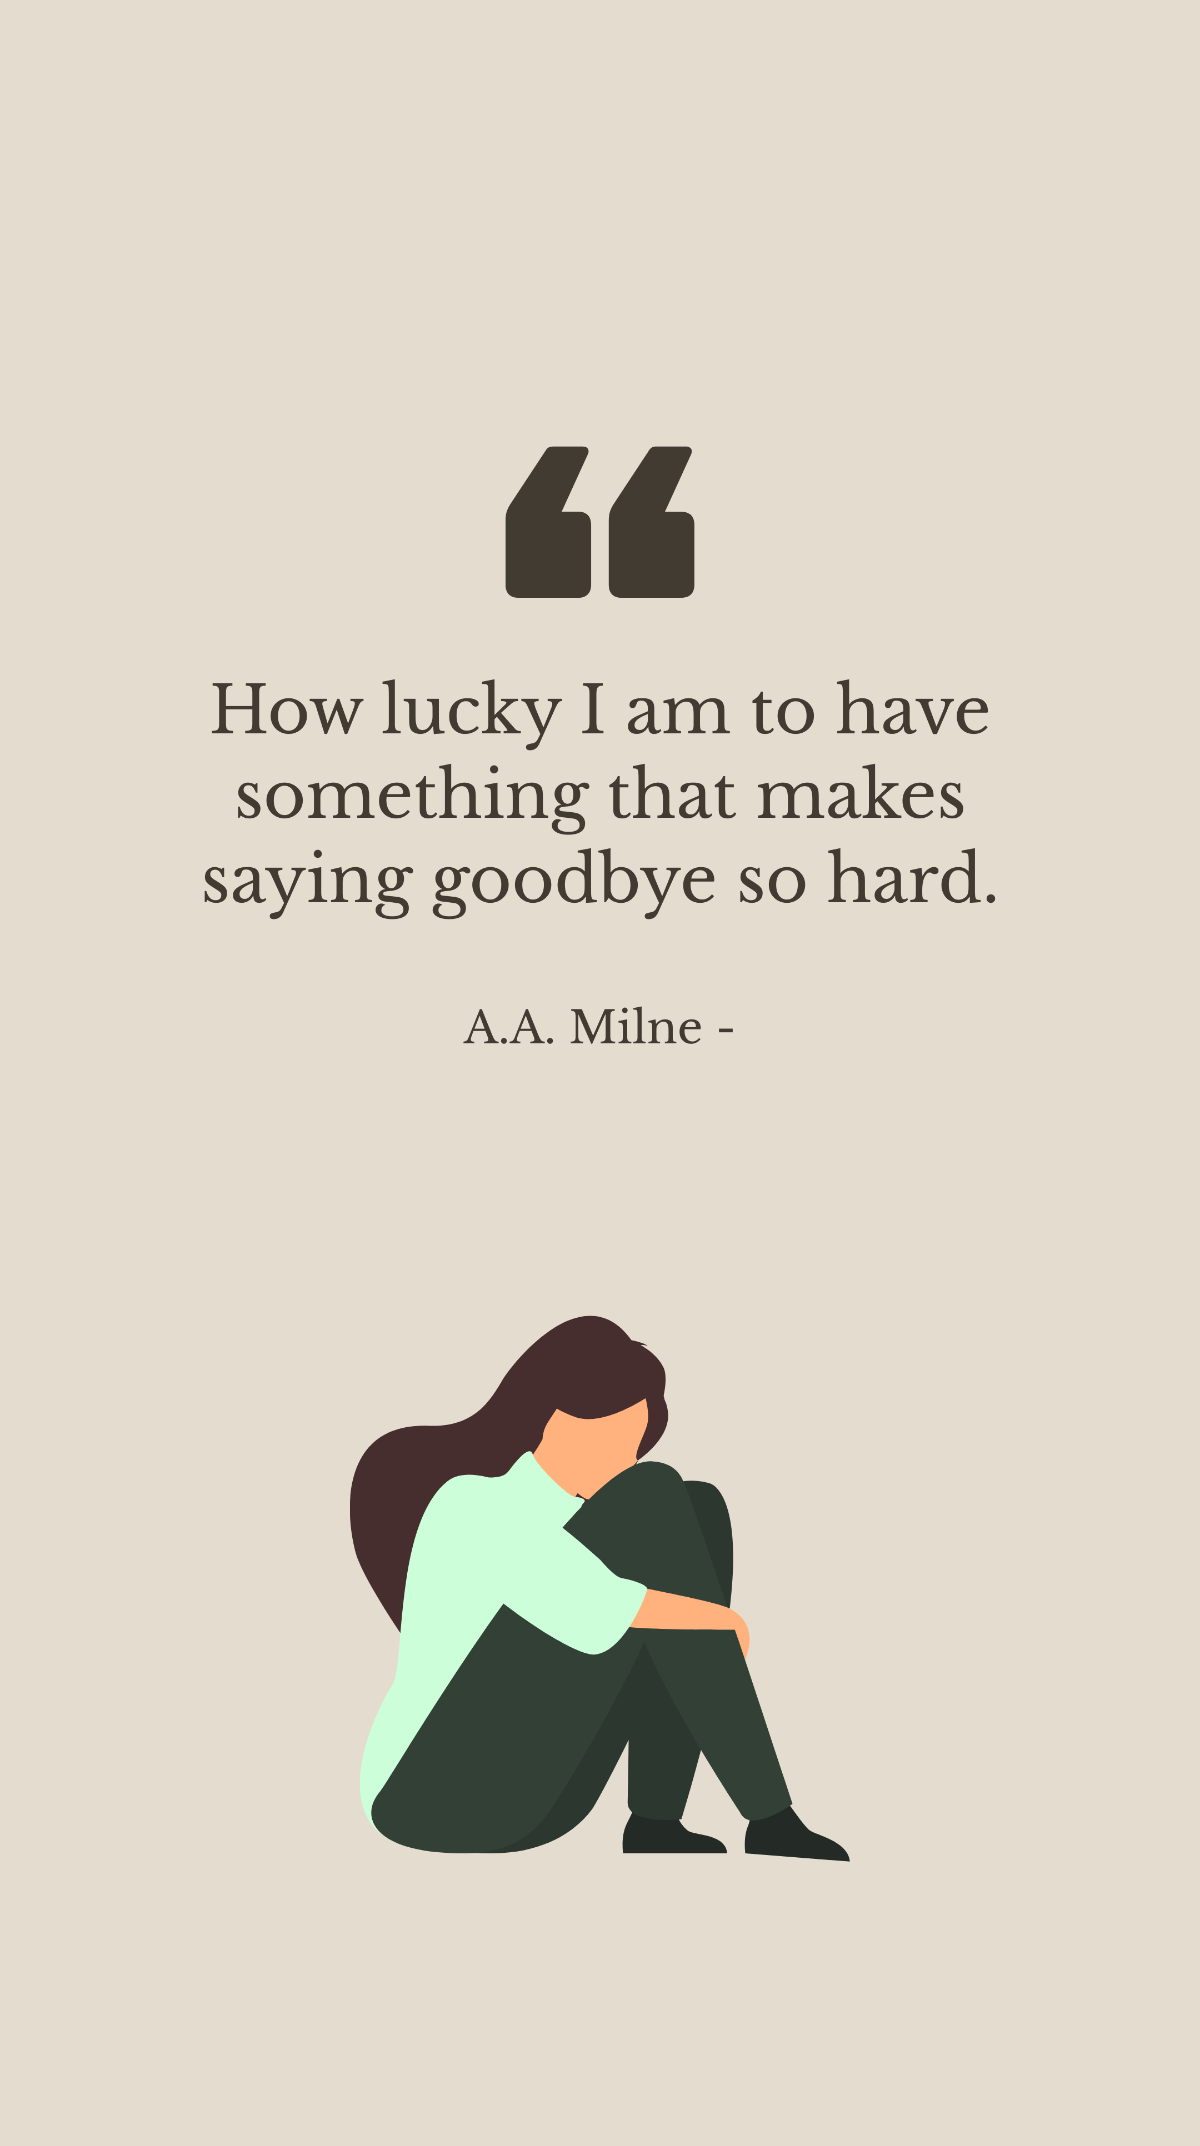 Free A.A. Milne - How lucky I am to have something that makes saying goodbye so hard. Template